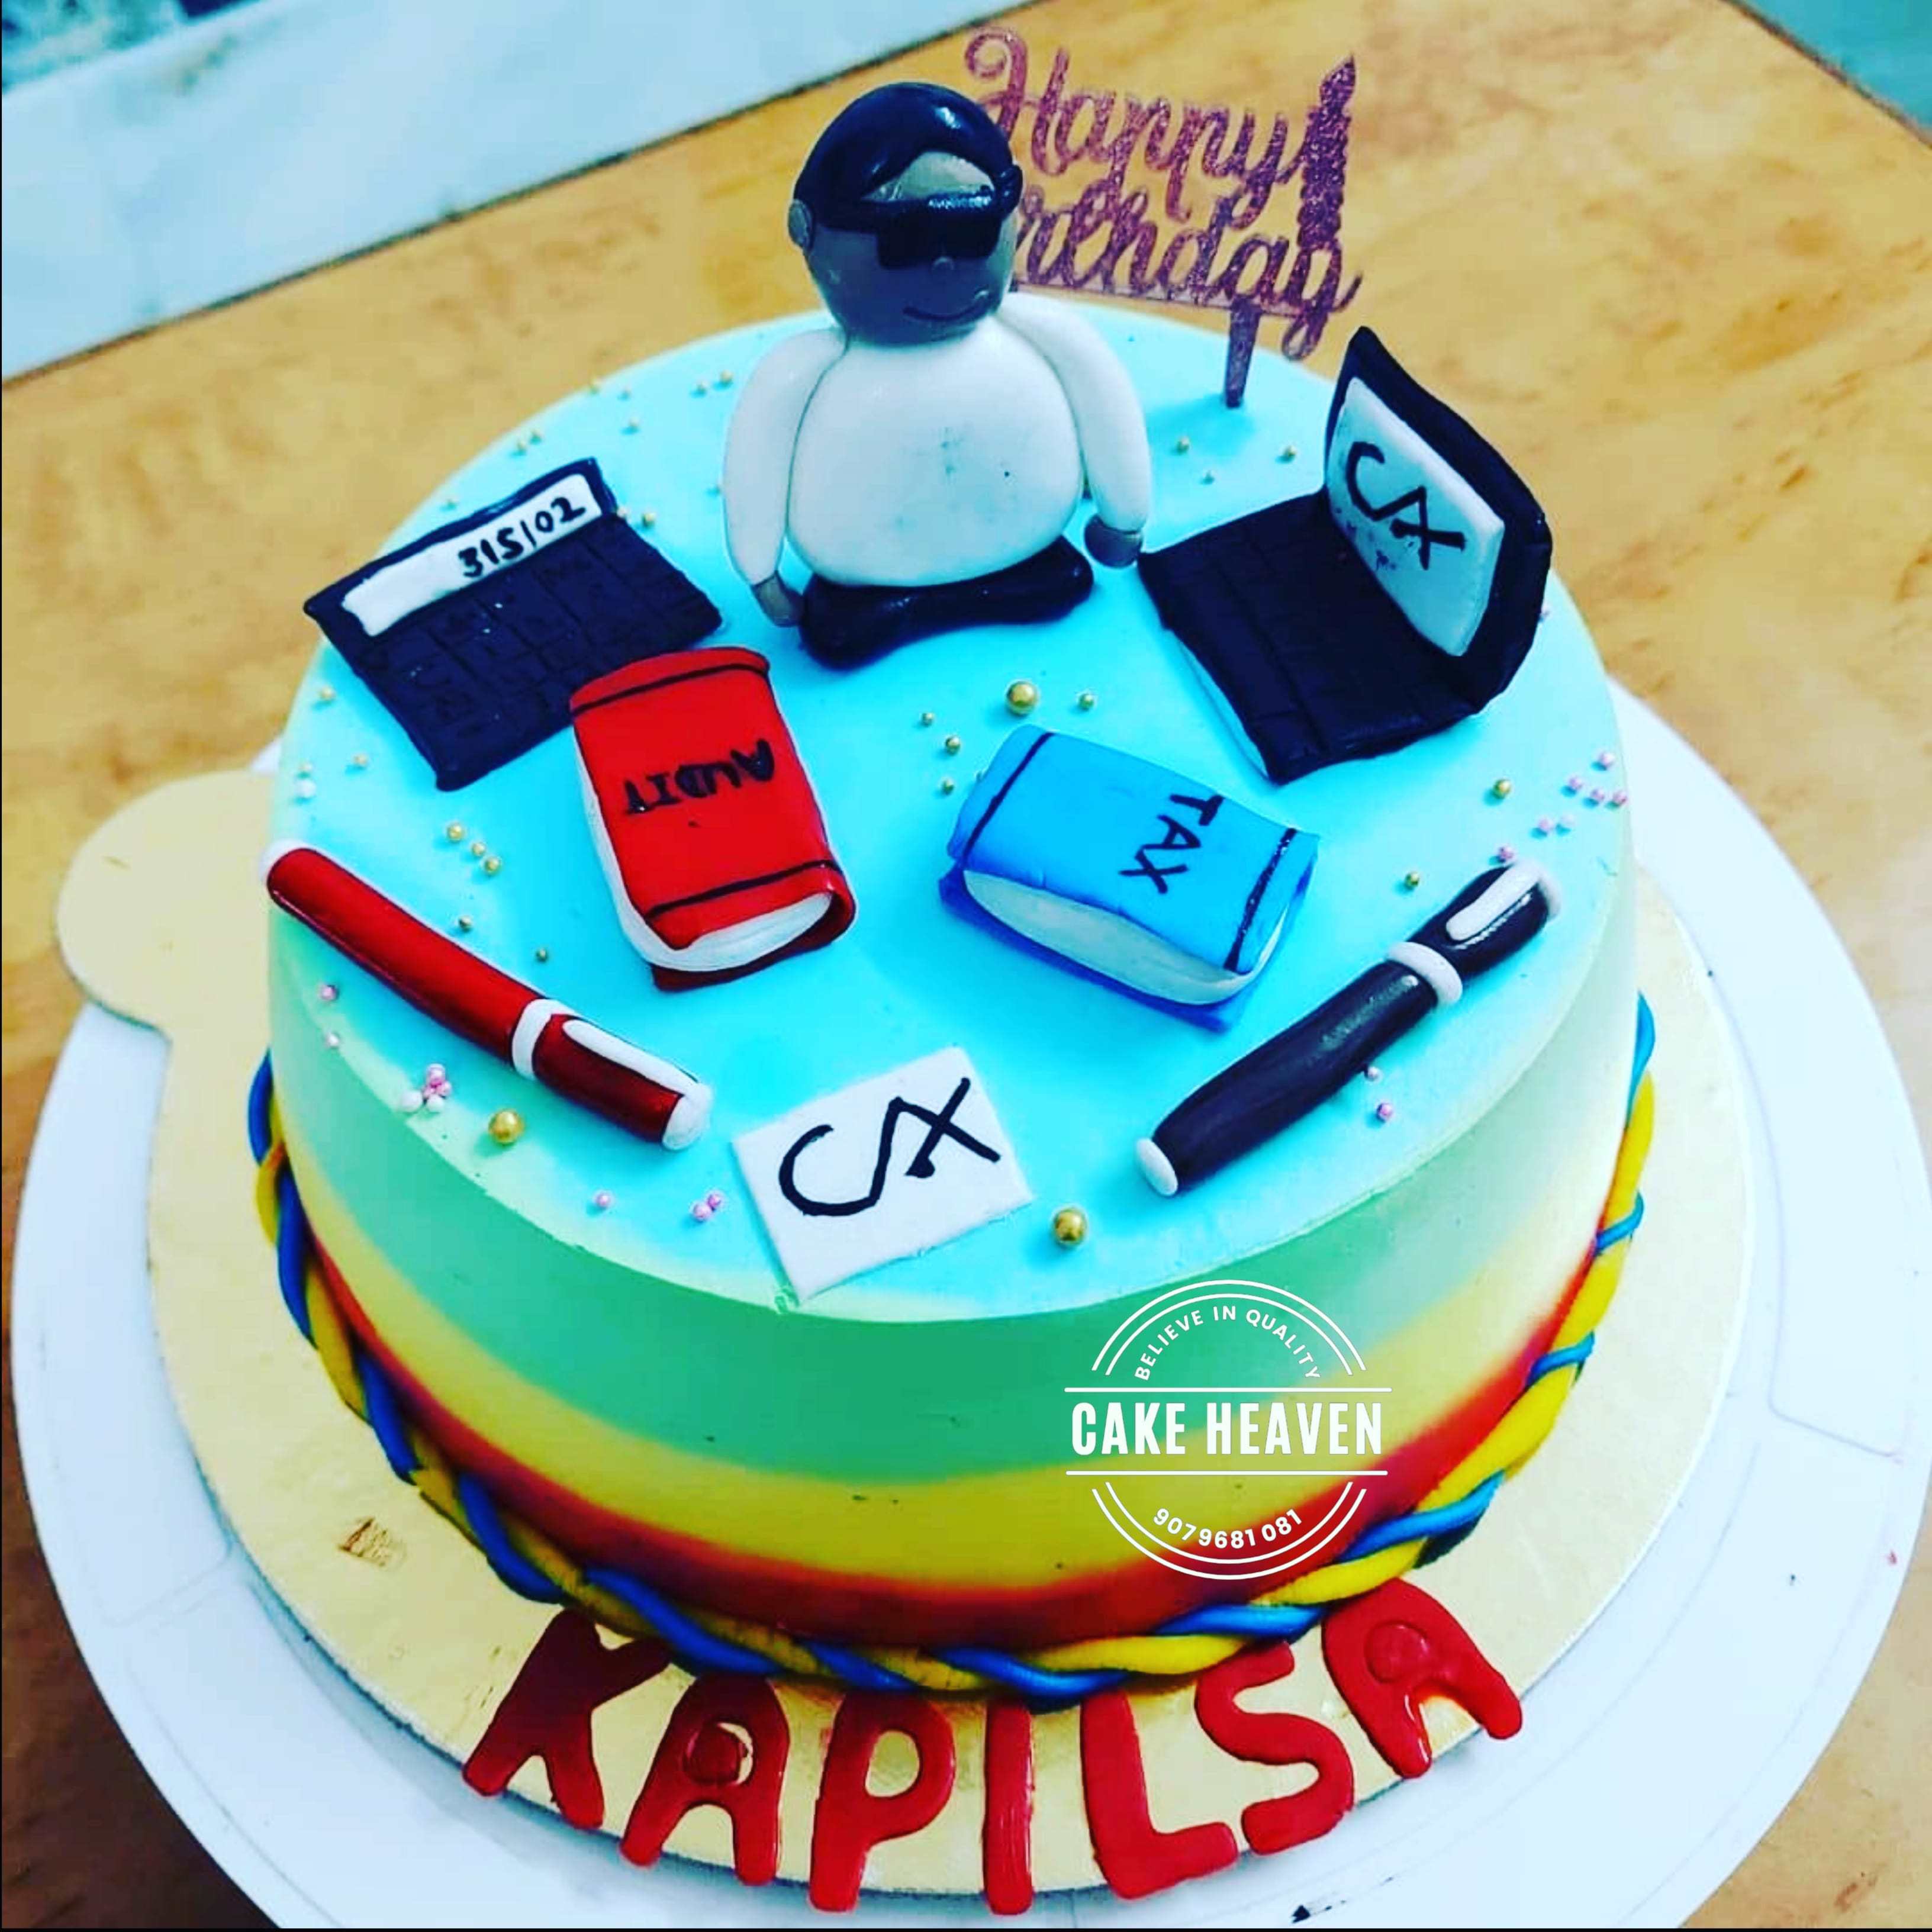 Charted Accountant Theme Cake, birthday cake for chartered accountant